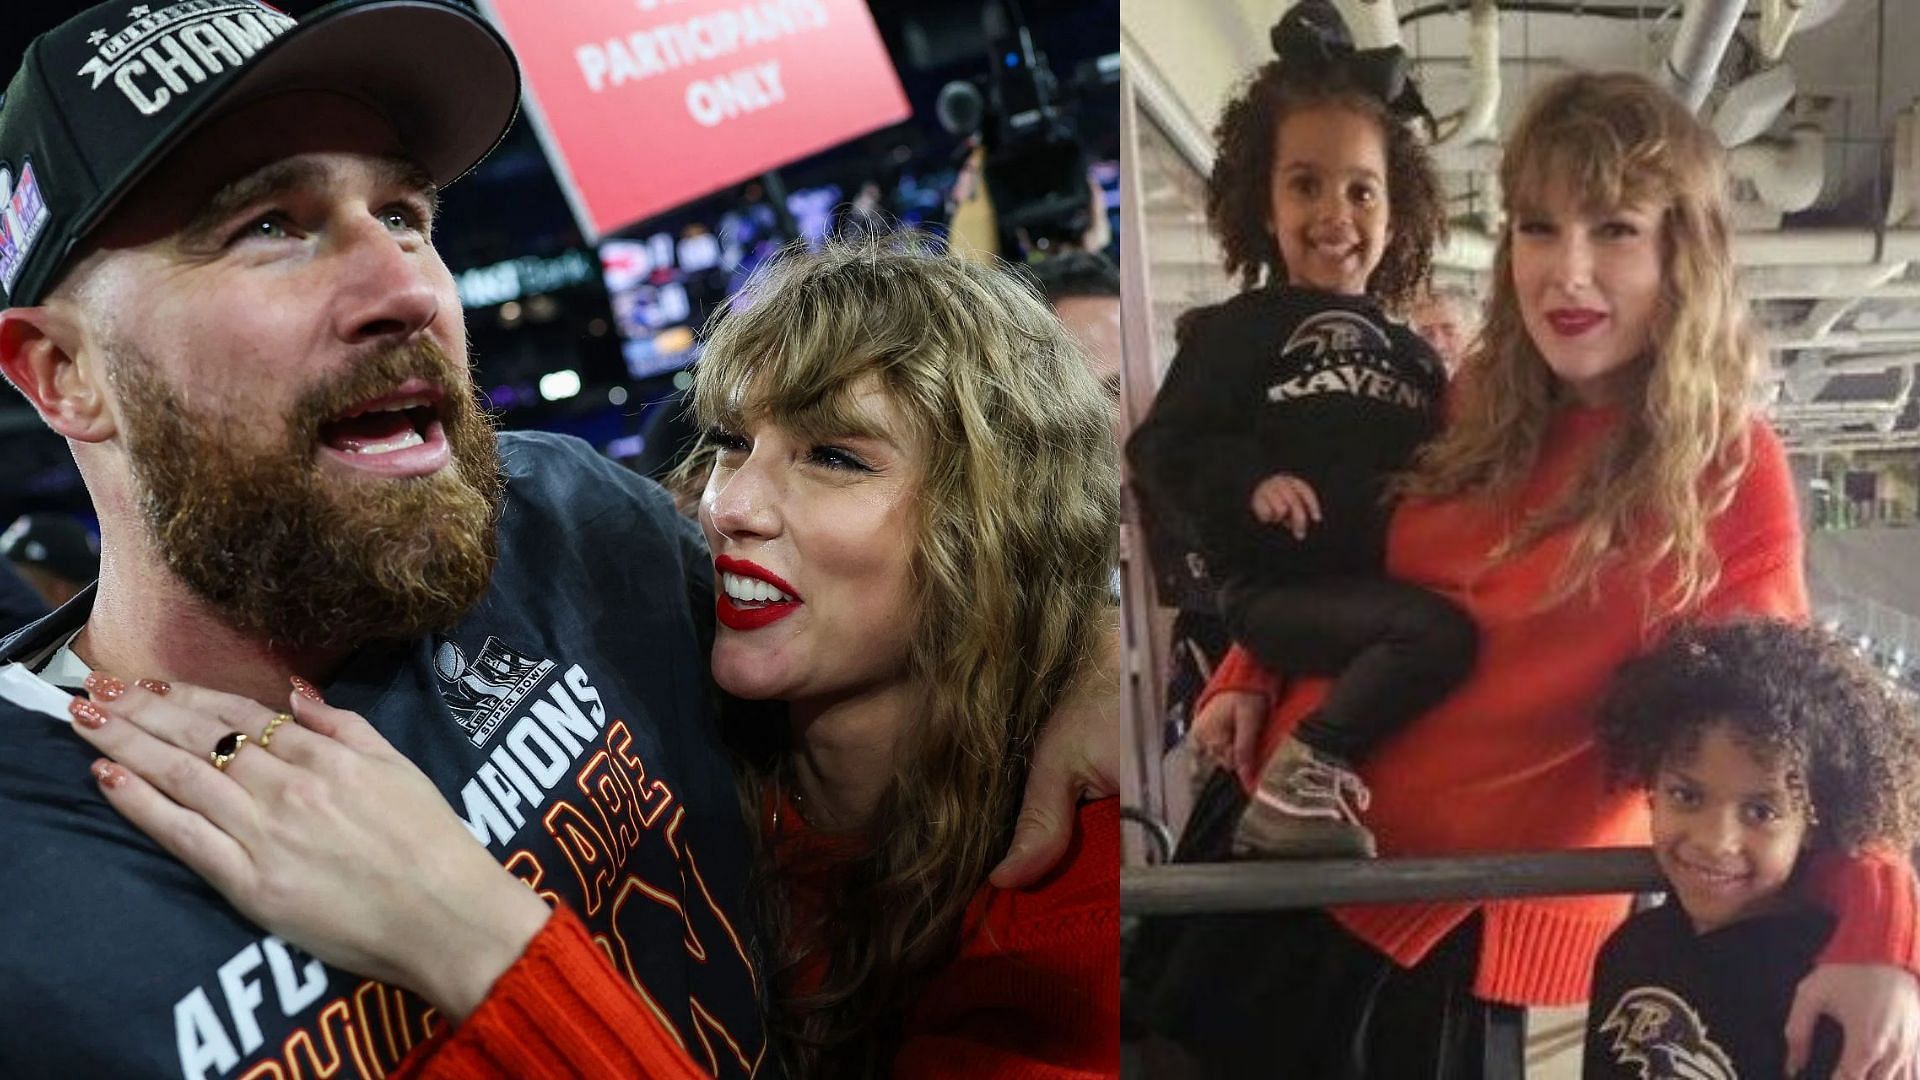 Taylor Swift poses for a photo with two young fans in Baltimore